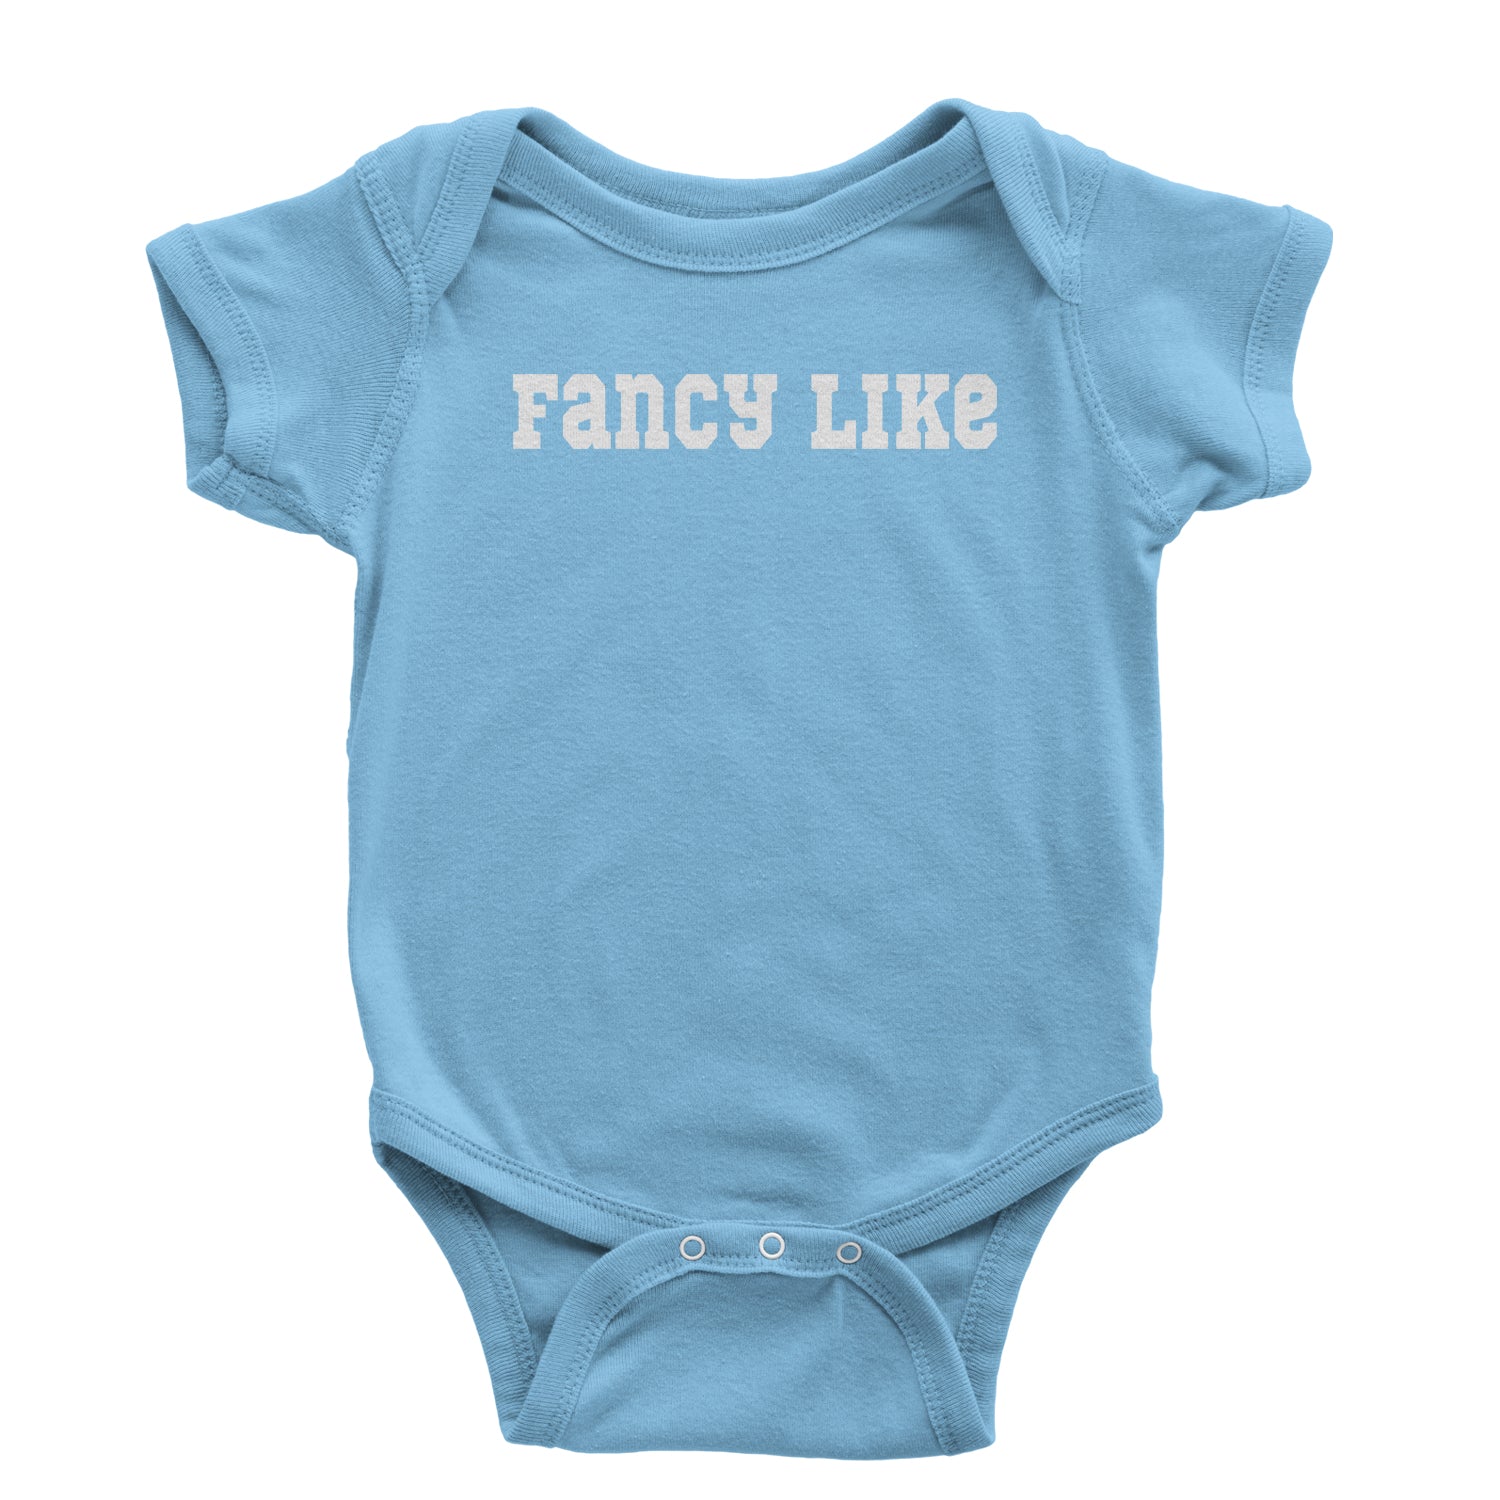 Fancy Like Infant One-Piece Romper Bodysuit hayes, walter by Expression Tees